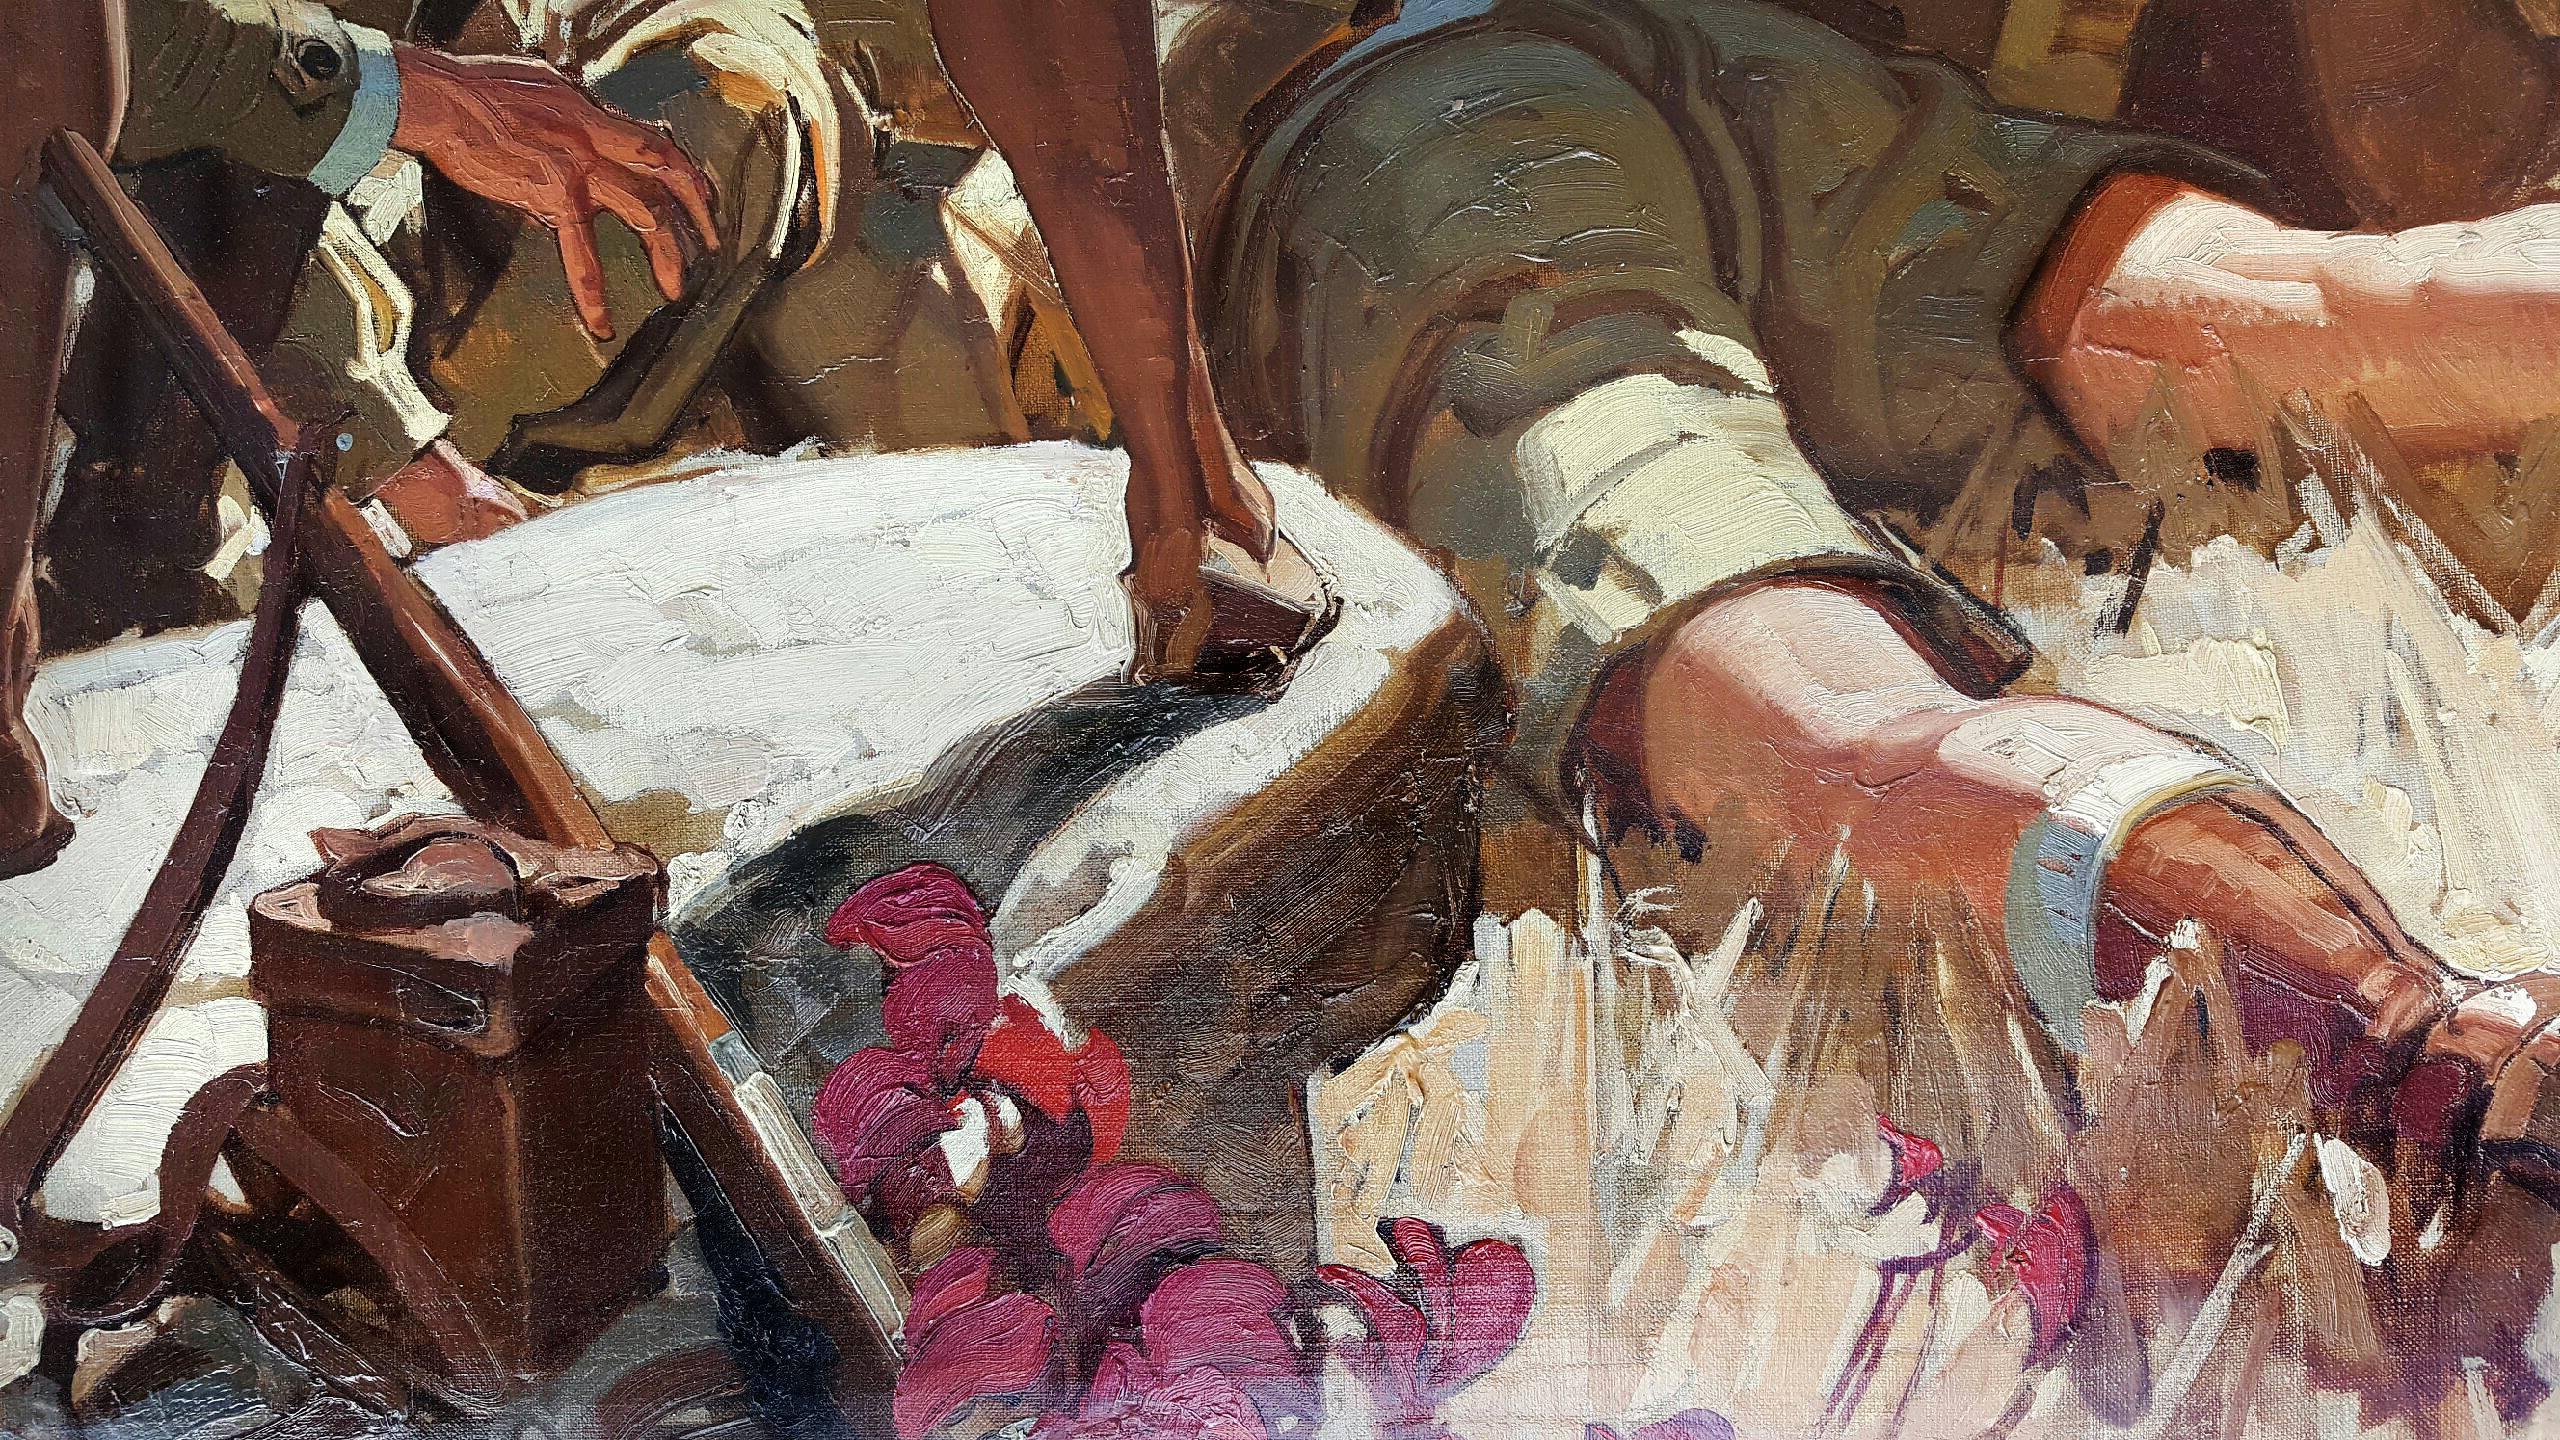 He Lay Face Down, The Short Happy Life of Francis Macomber, Ernest Hemingway - Painting by Dean Cornwell